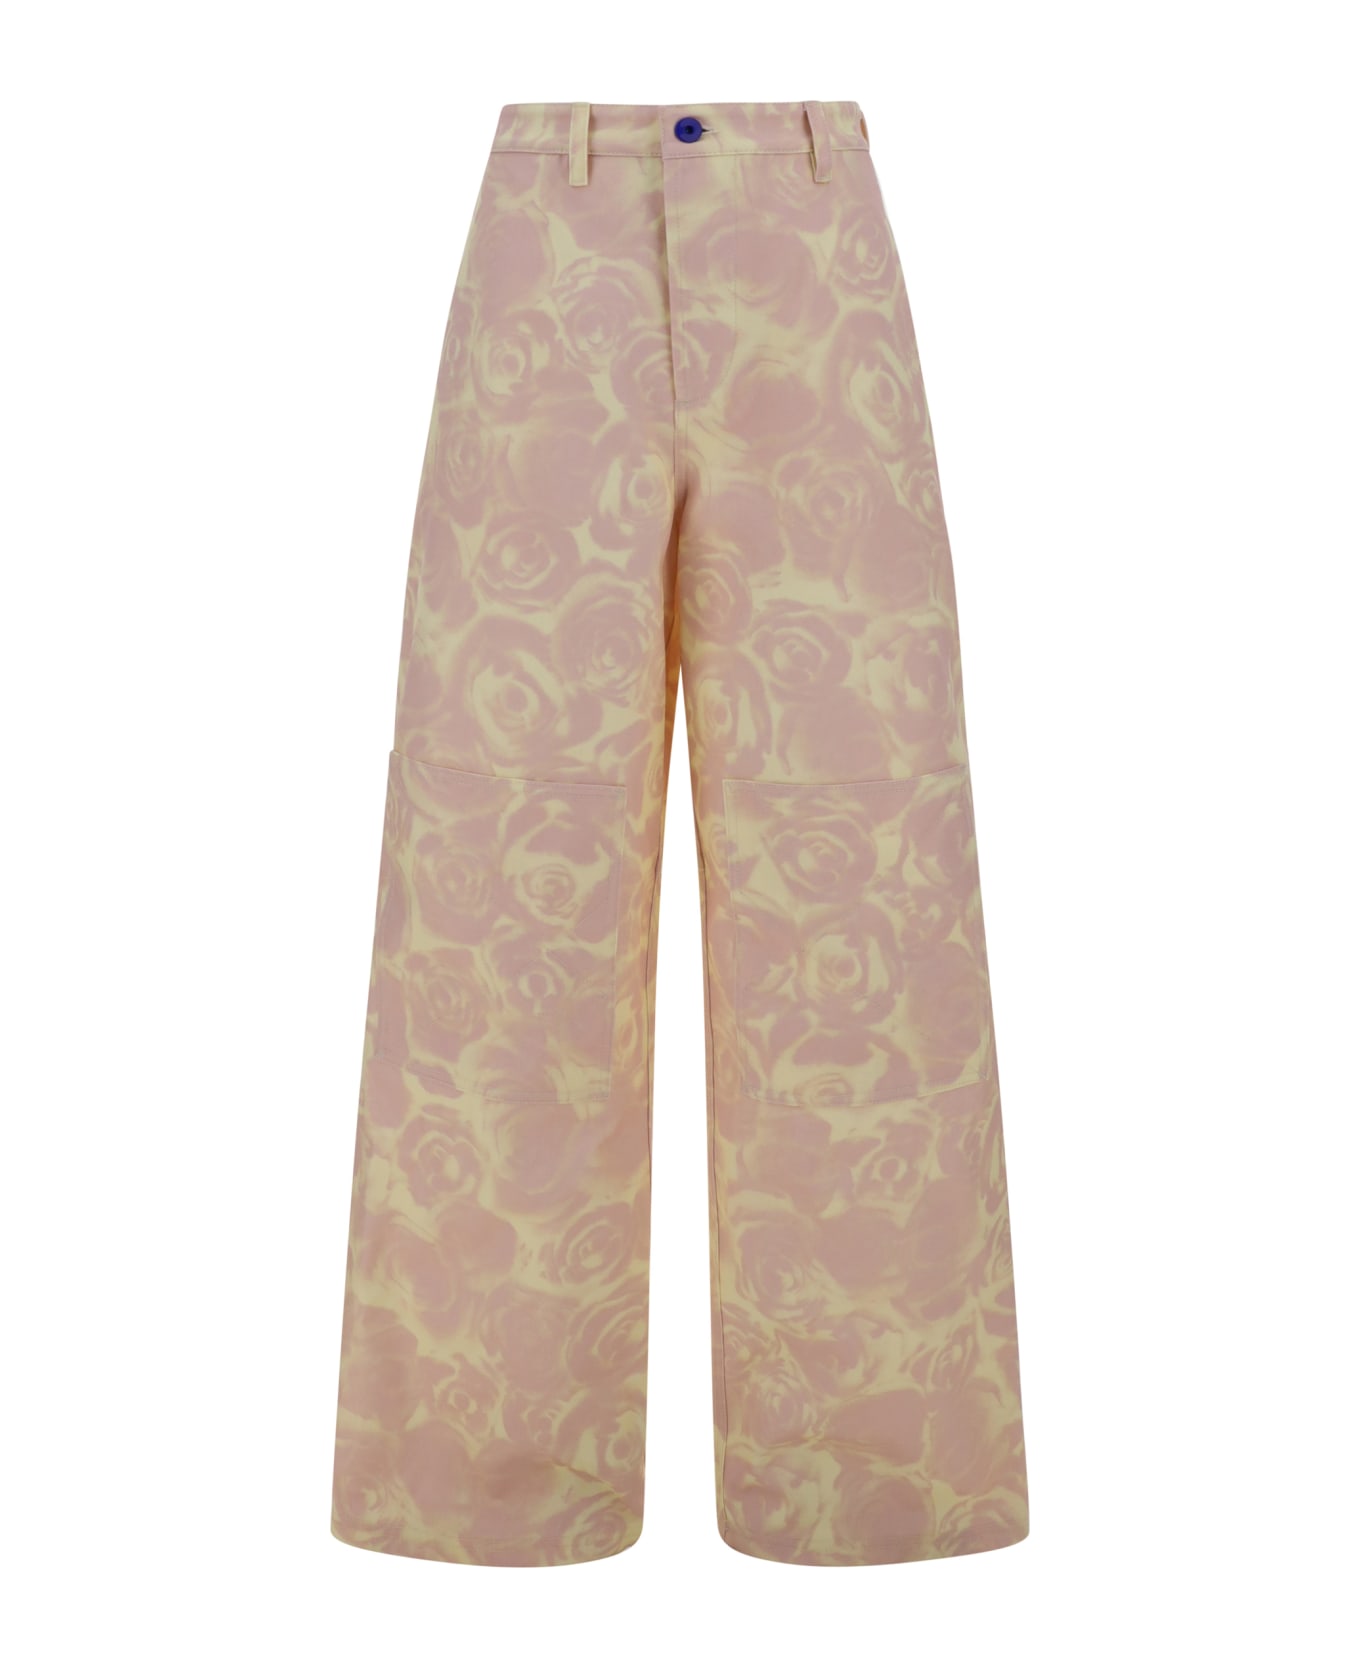 Burberry Pants - Cameo Ip Pattern ボトムス